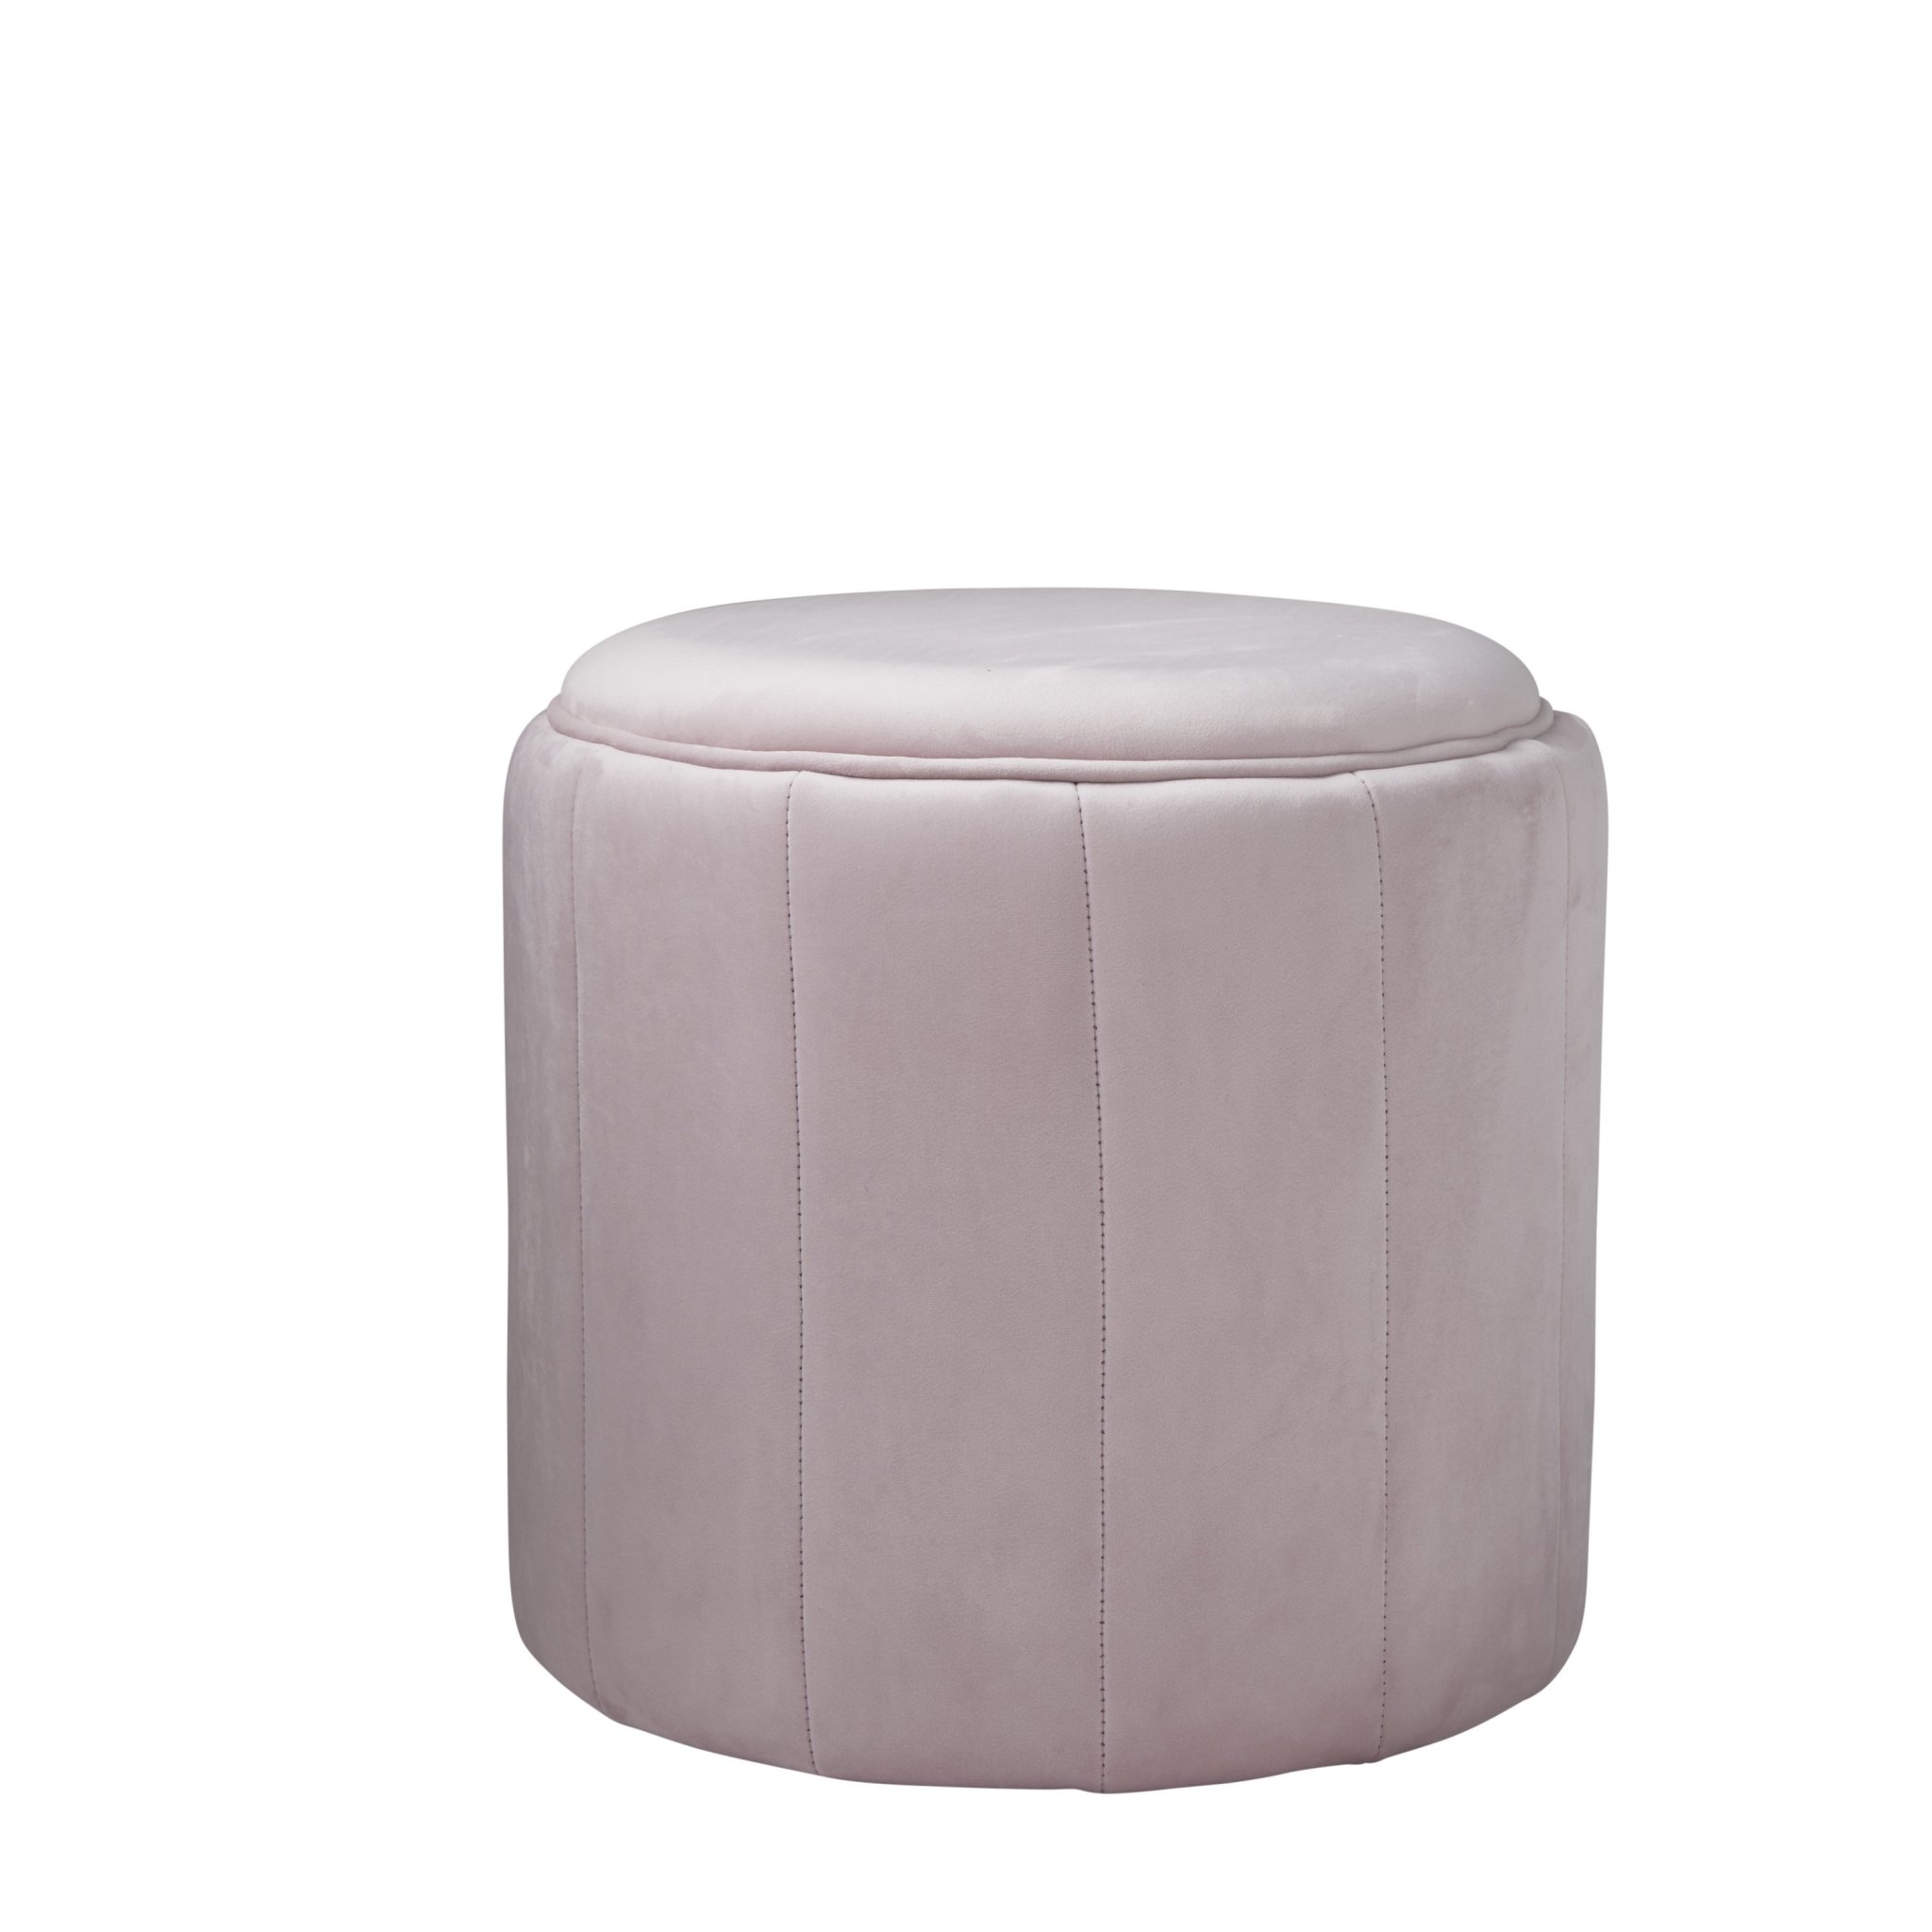 Native Home & Lifestyle Round Stool In Pastel Pink Velvet 43 x 43 x 42cm – Furniture & Homeware – The Luxe Home